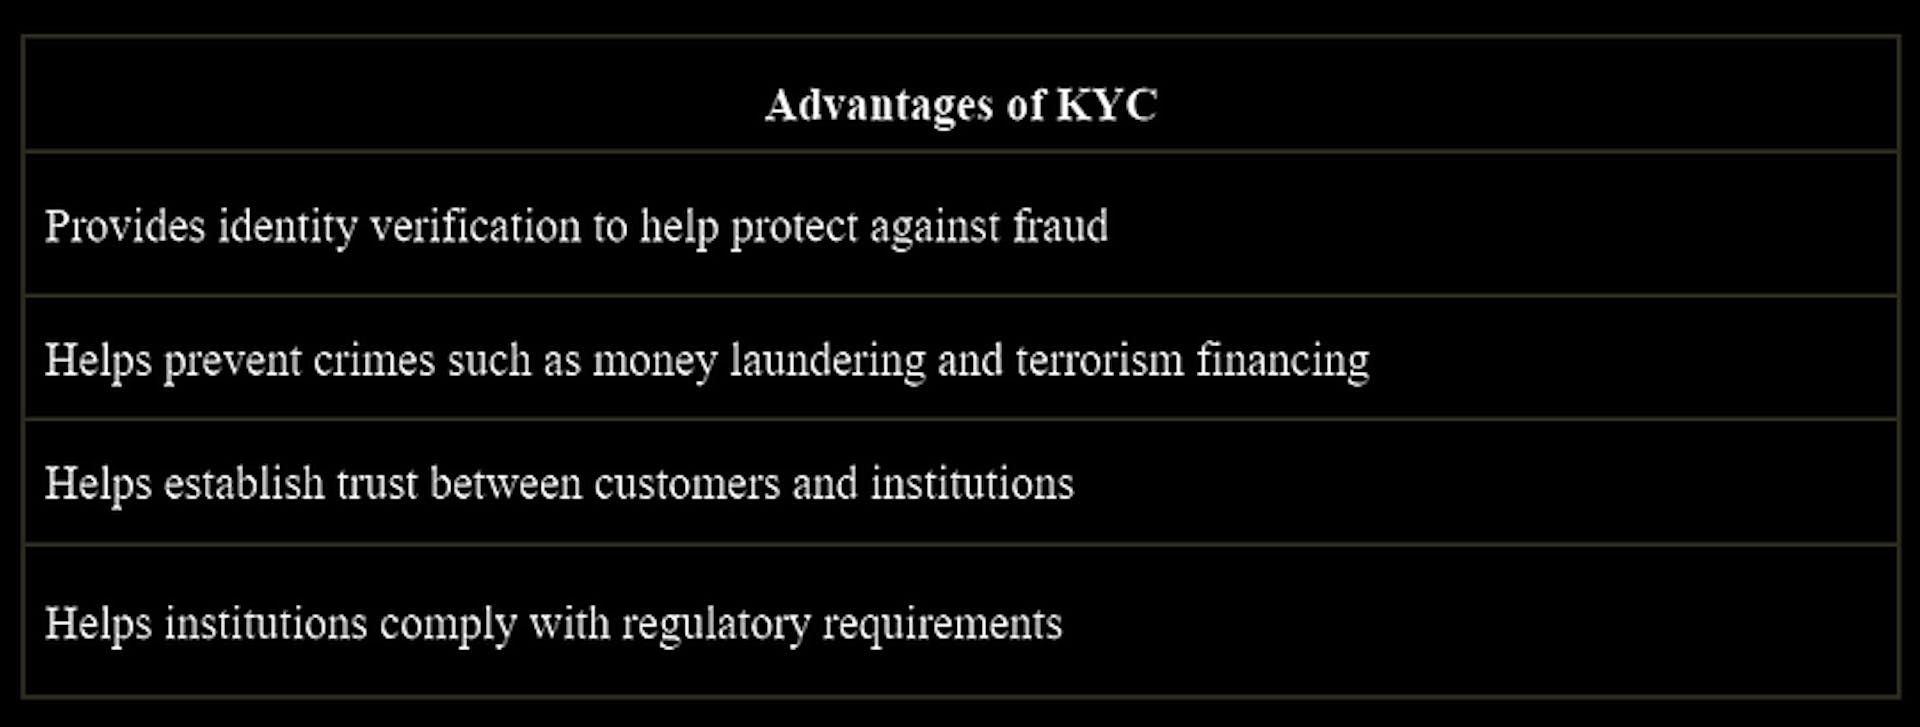 Table 3. Advantages of KYC.